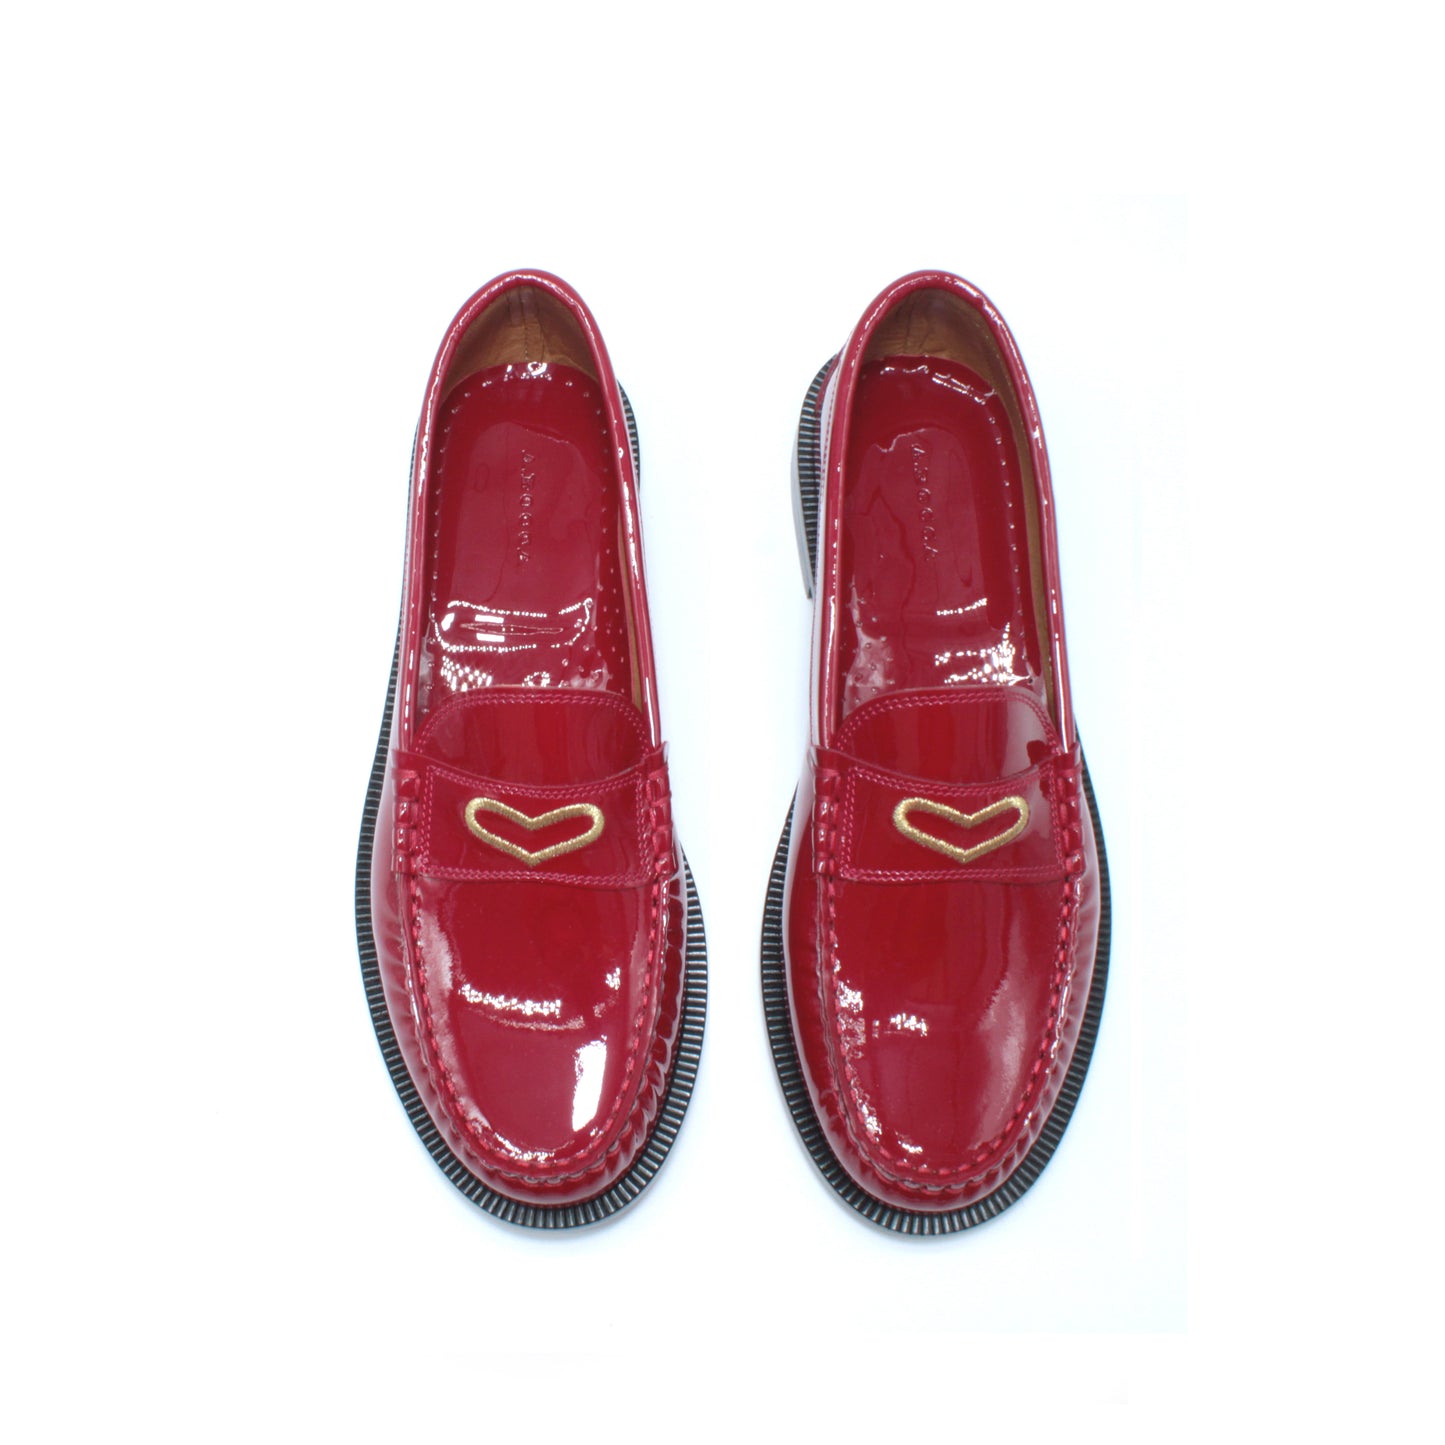 Merlot-colored patent loafer